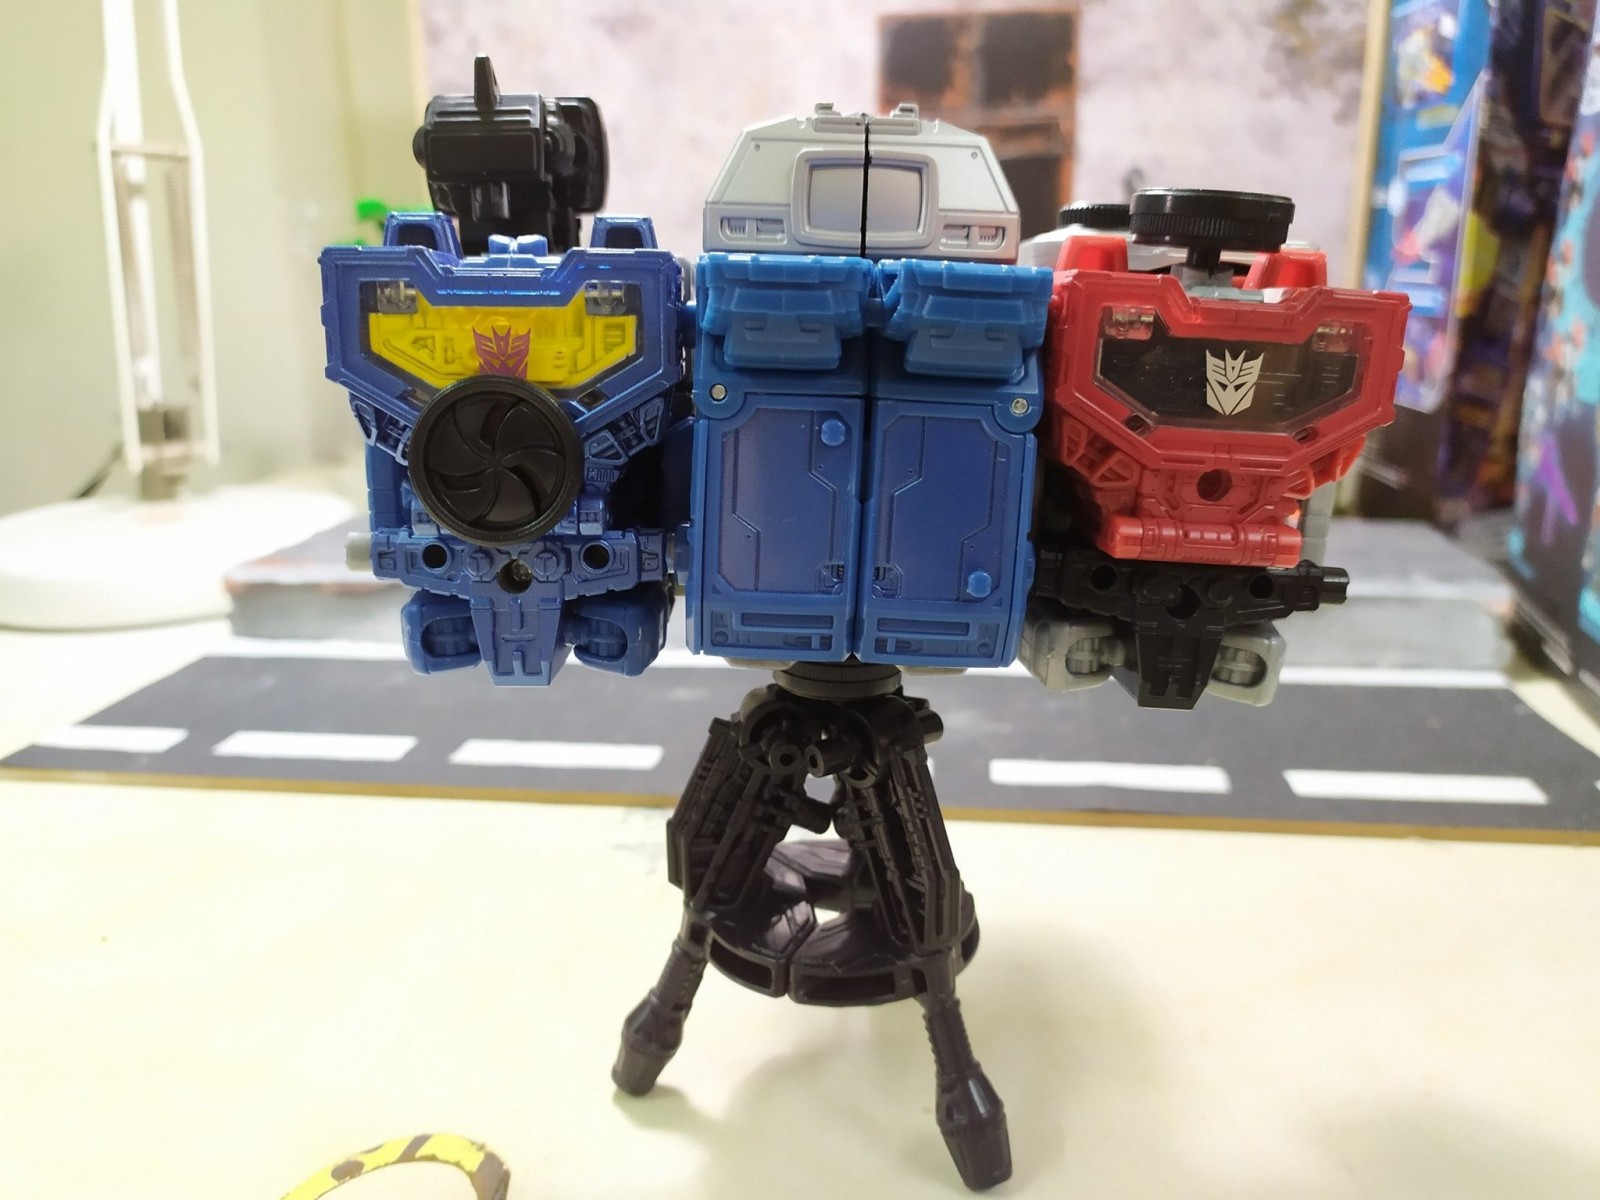 Transformers News: New Transformers War for Cybertron Siege Refraktor Reconnaissance Team In Hand Images